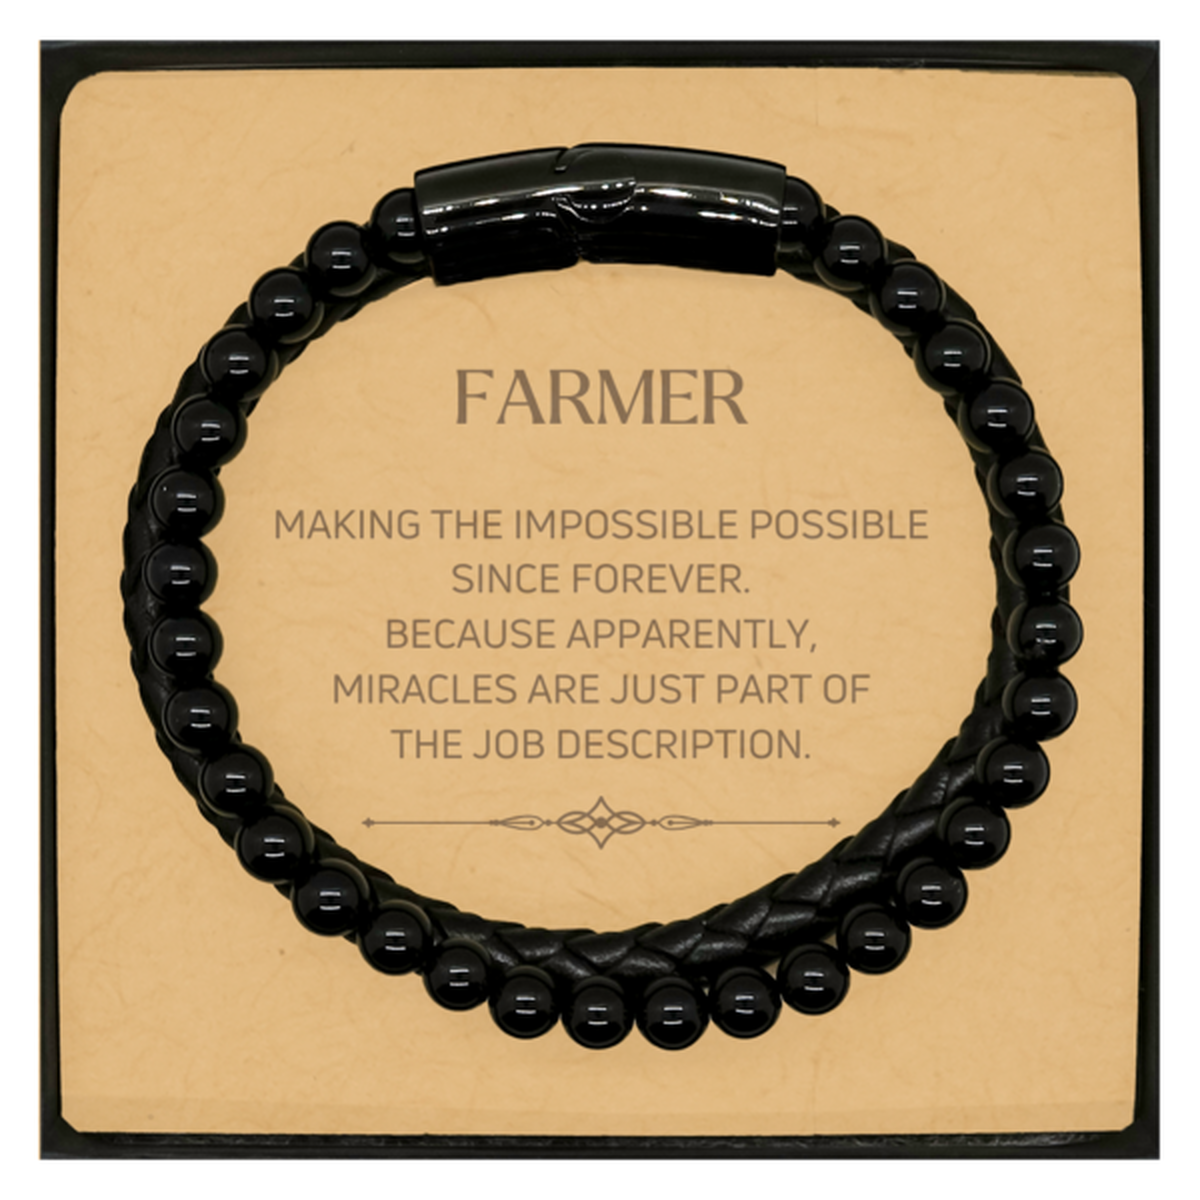 Funny Farmer Gifts, Miracles are just part of the job description, Inspirational Birthday Christmas Stone Leather Bracelets For Farmer, Men, Women, Coworkers, Friends, Boss